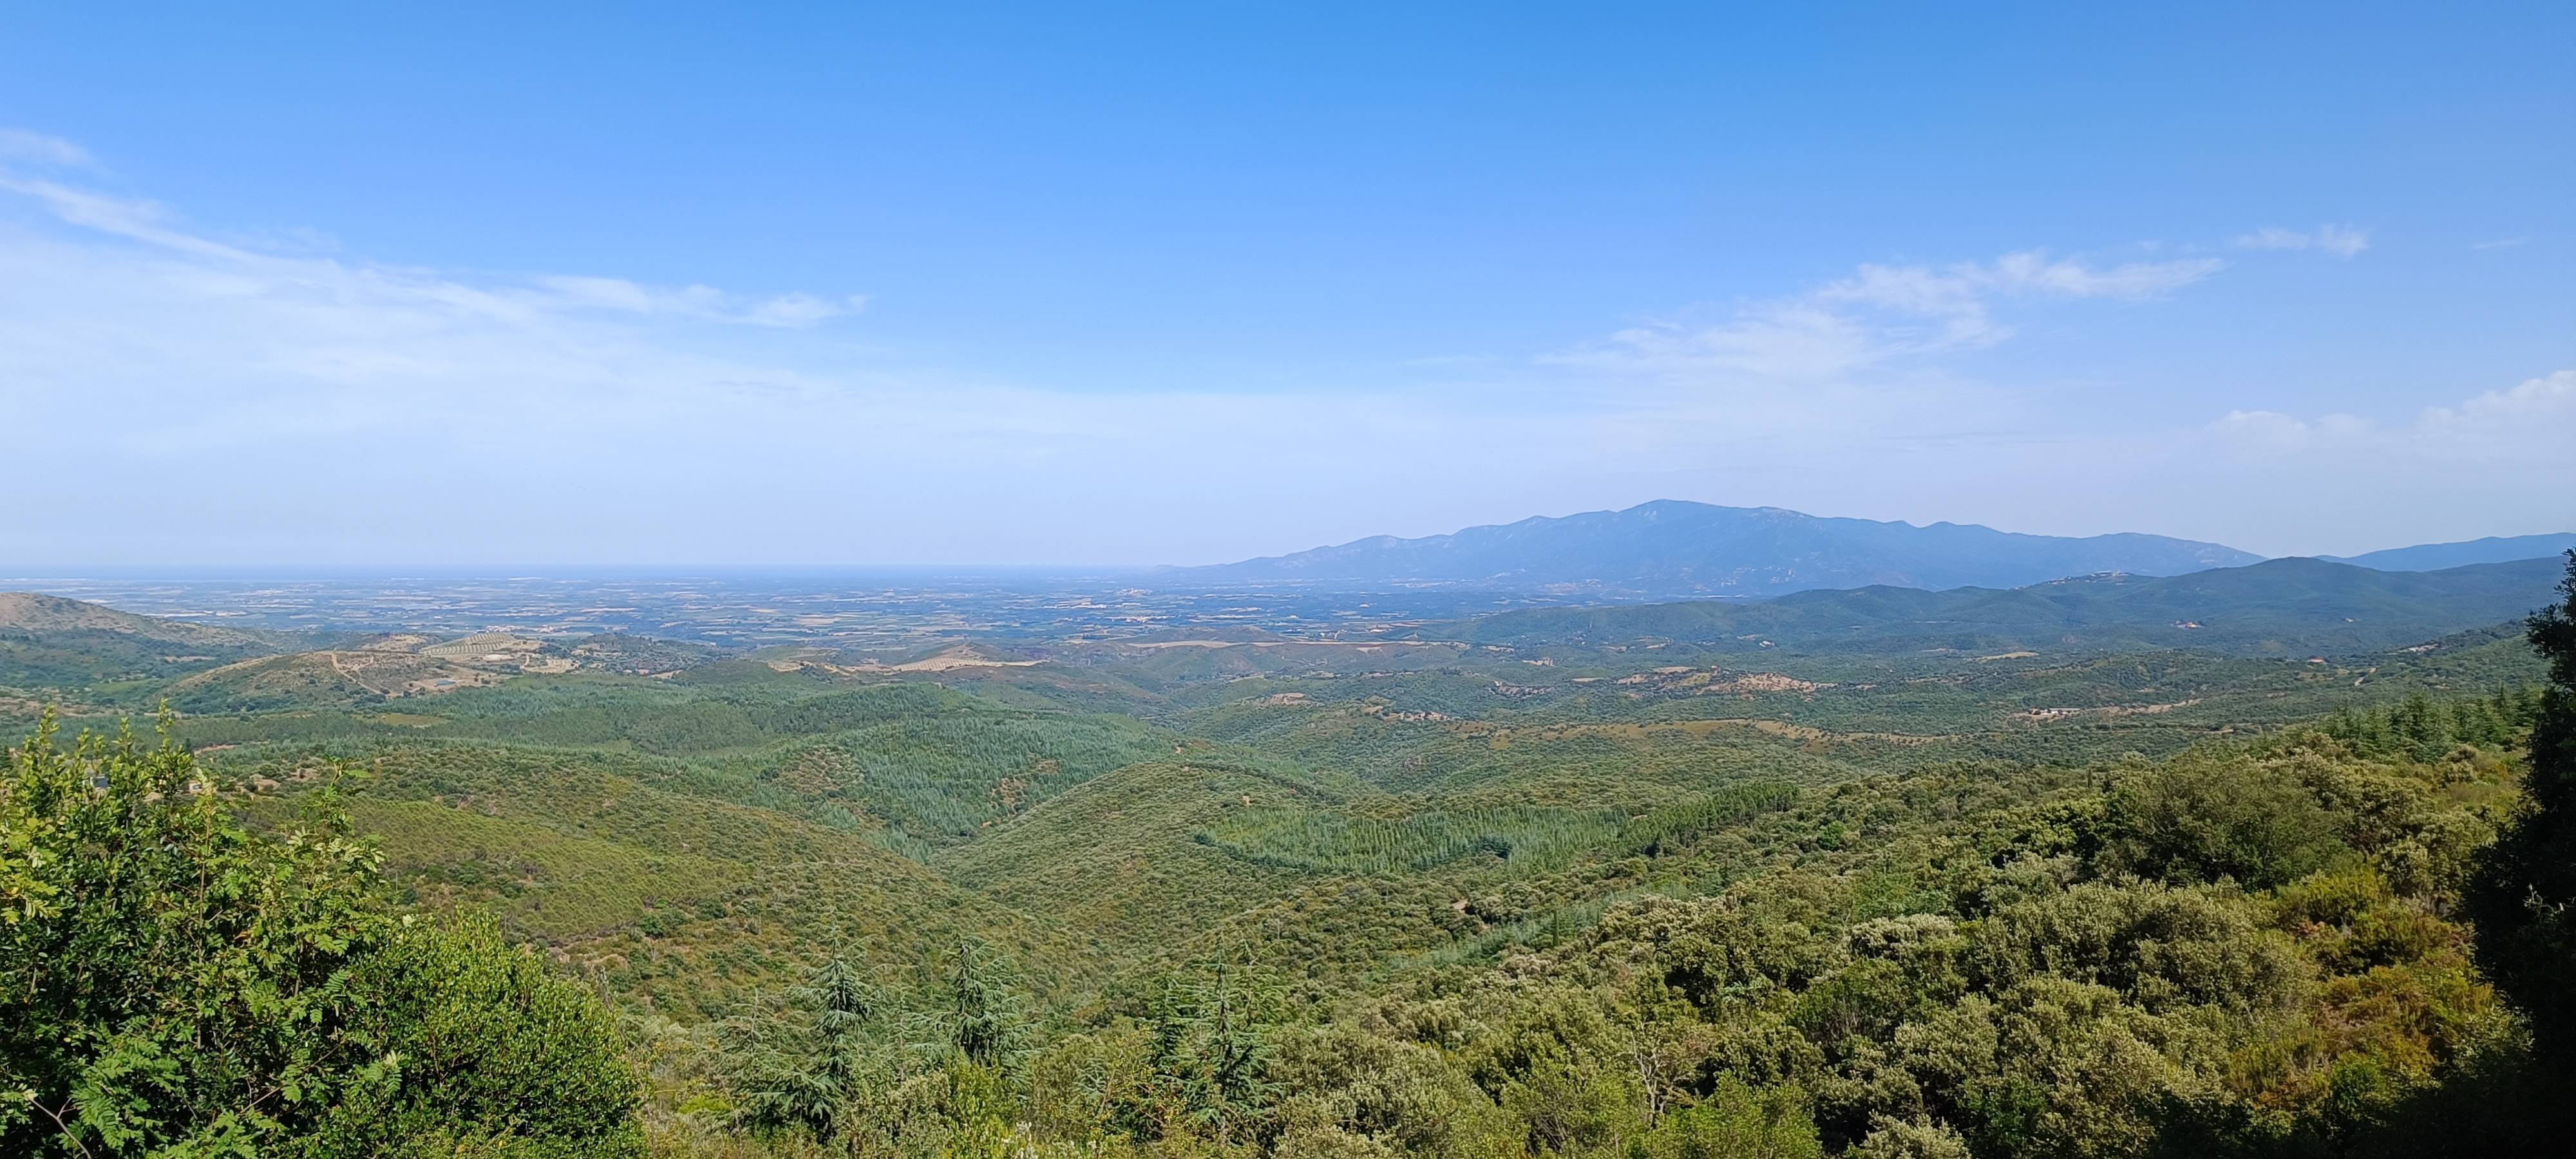 Picture from Area related to Perpignan - Prades, Puig Tallat, Roussillon Agrégats shoot by Romano Serra